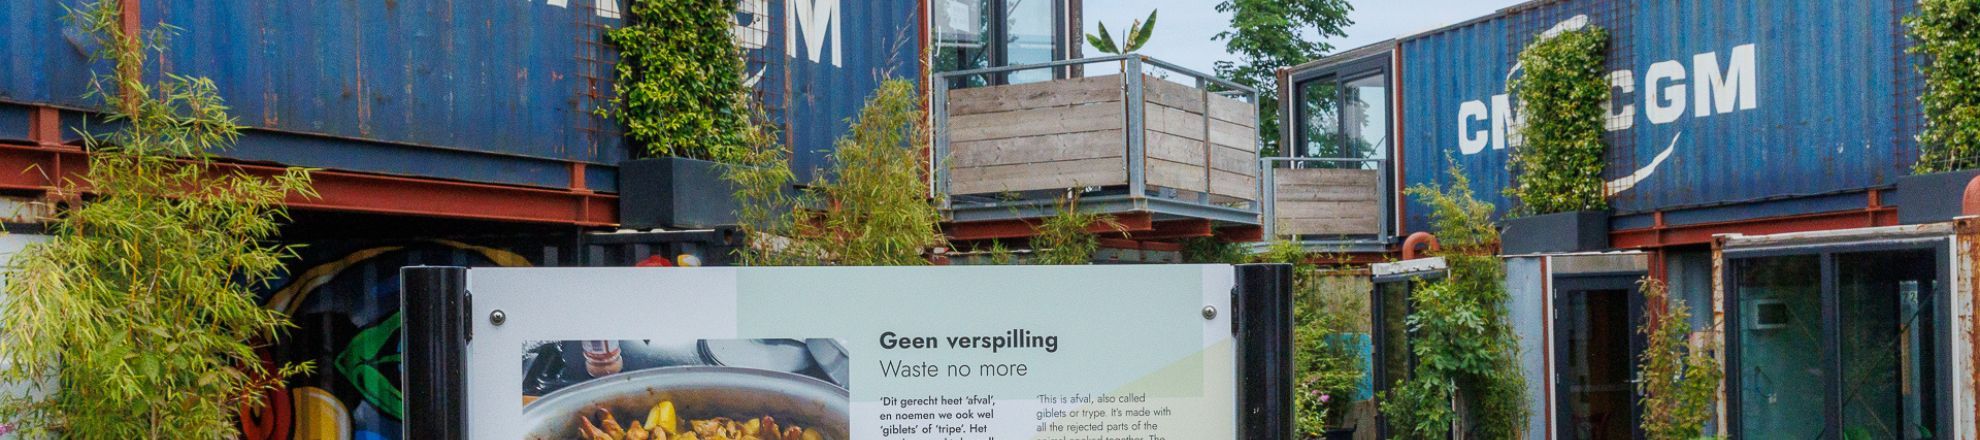 Containers en bord geen verspilling | Food Systems Innovations